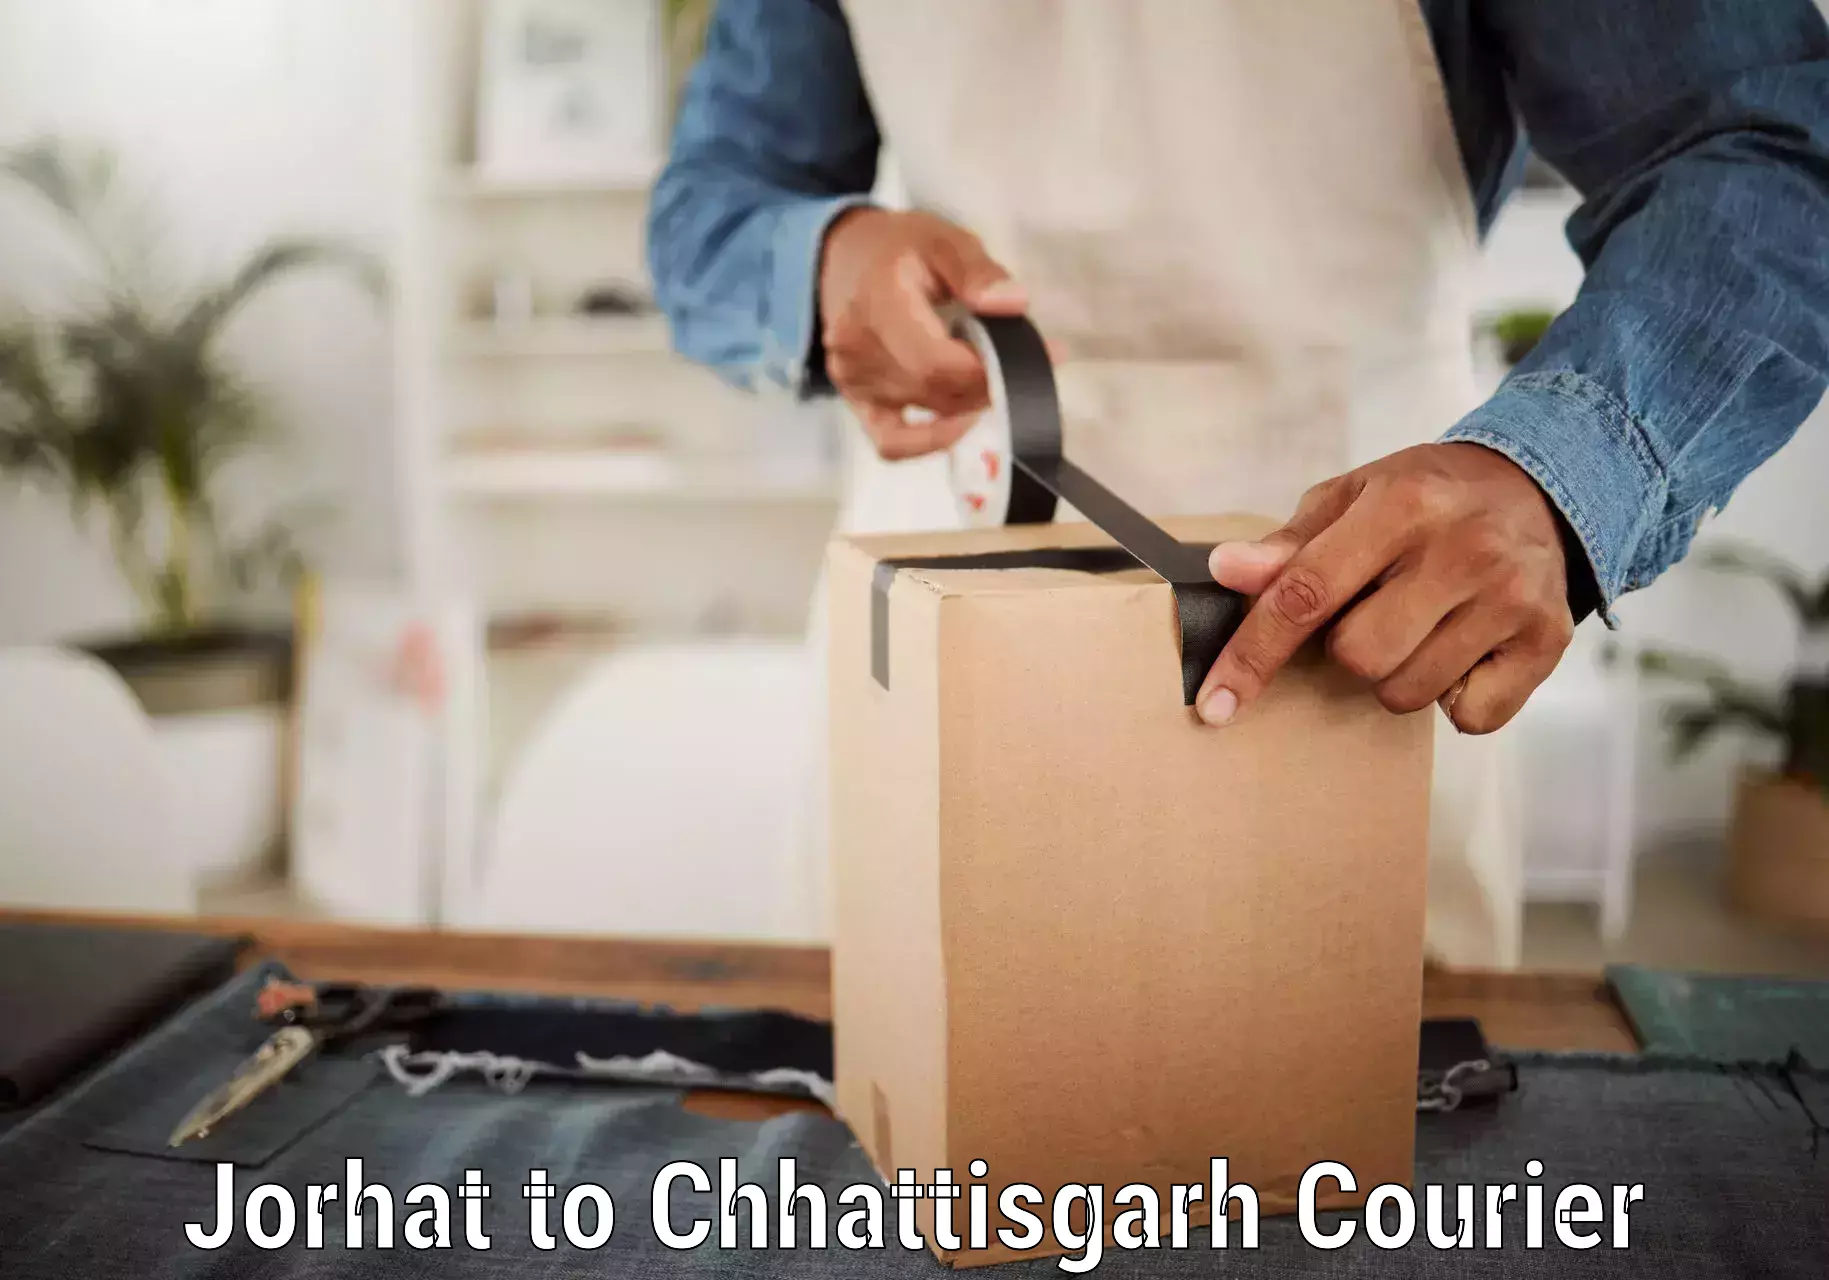 Cost-effective courier options Jorhat to Raigarh